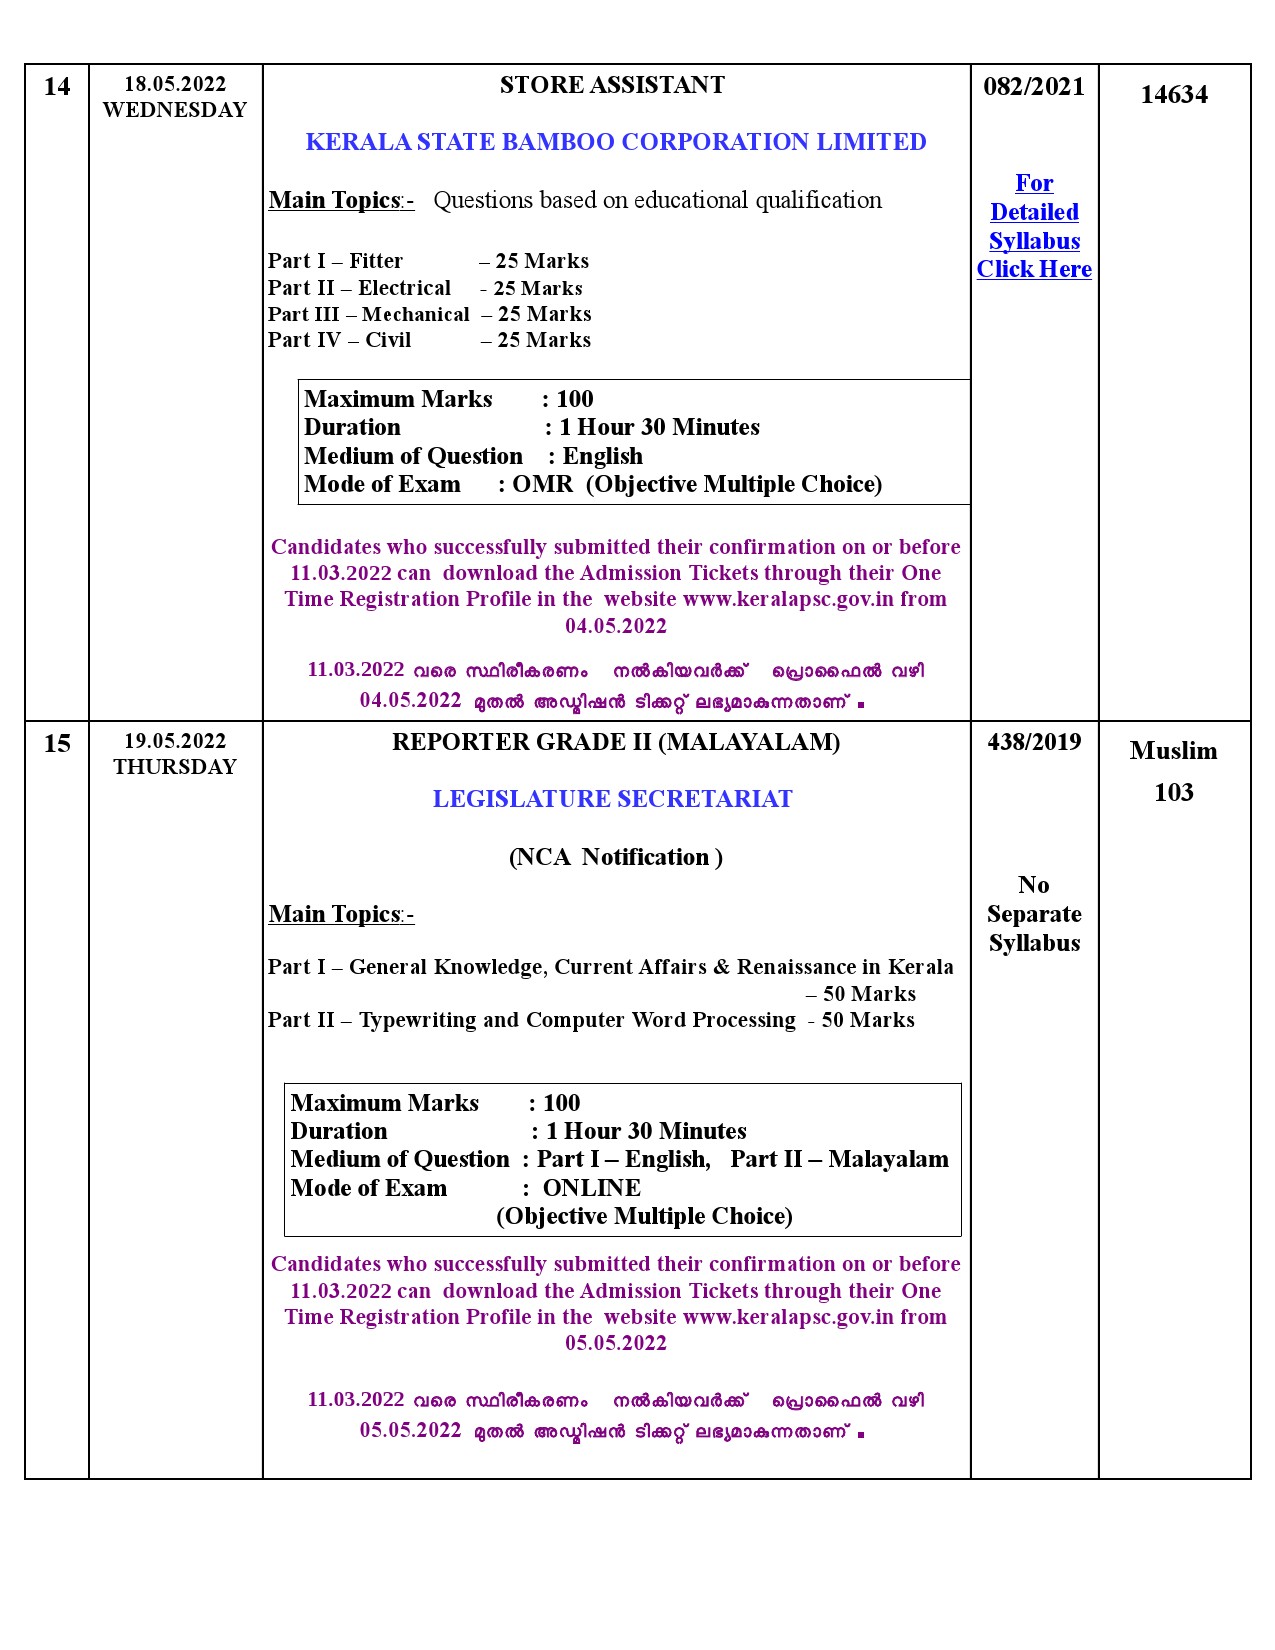 KPSC EXAMINATION PROGRAMME FOR THE MONTH OF MAY 2022 - Notification Image 7